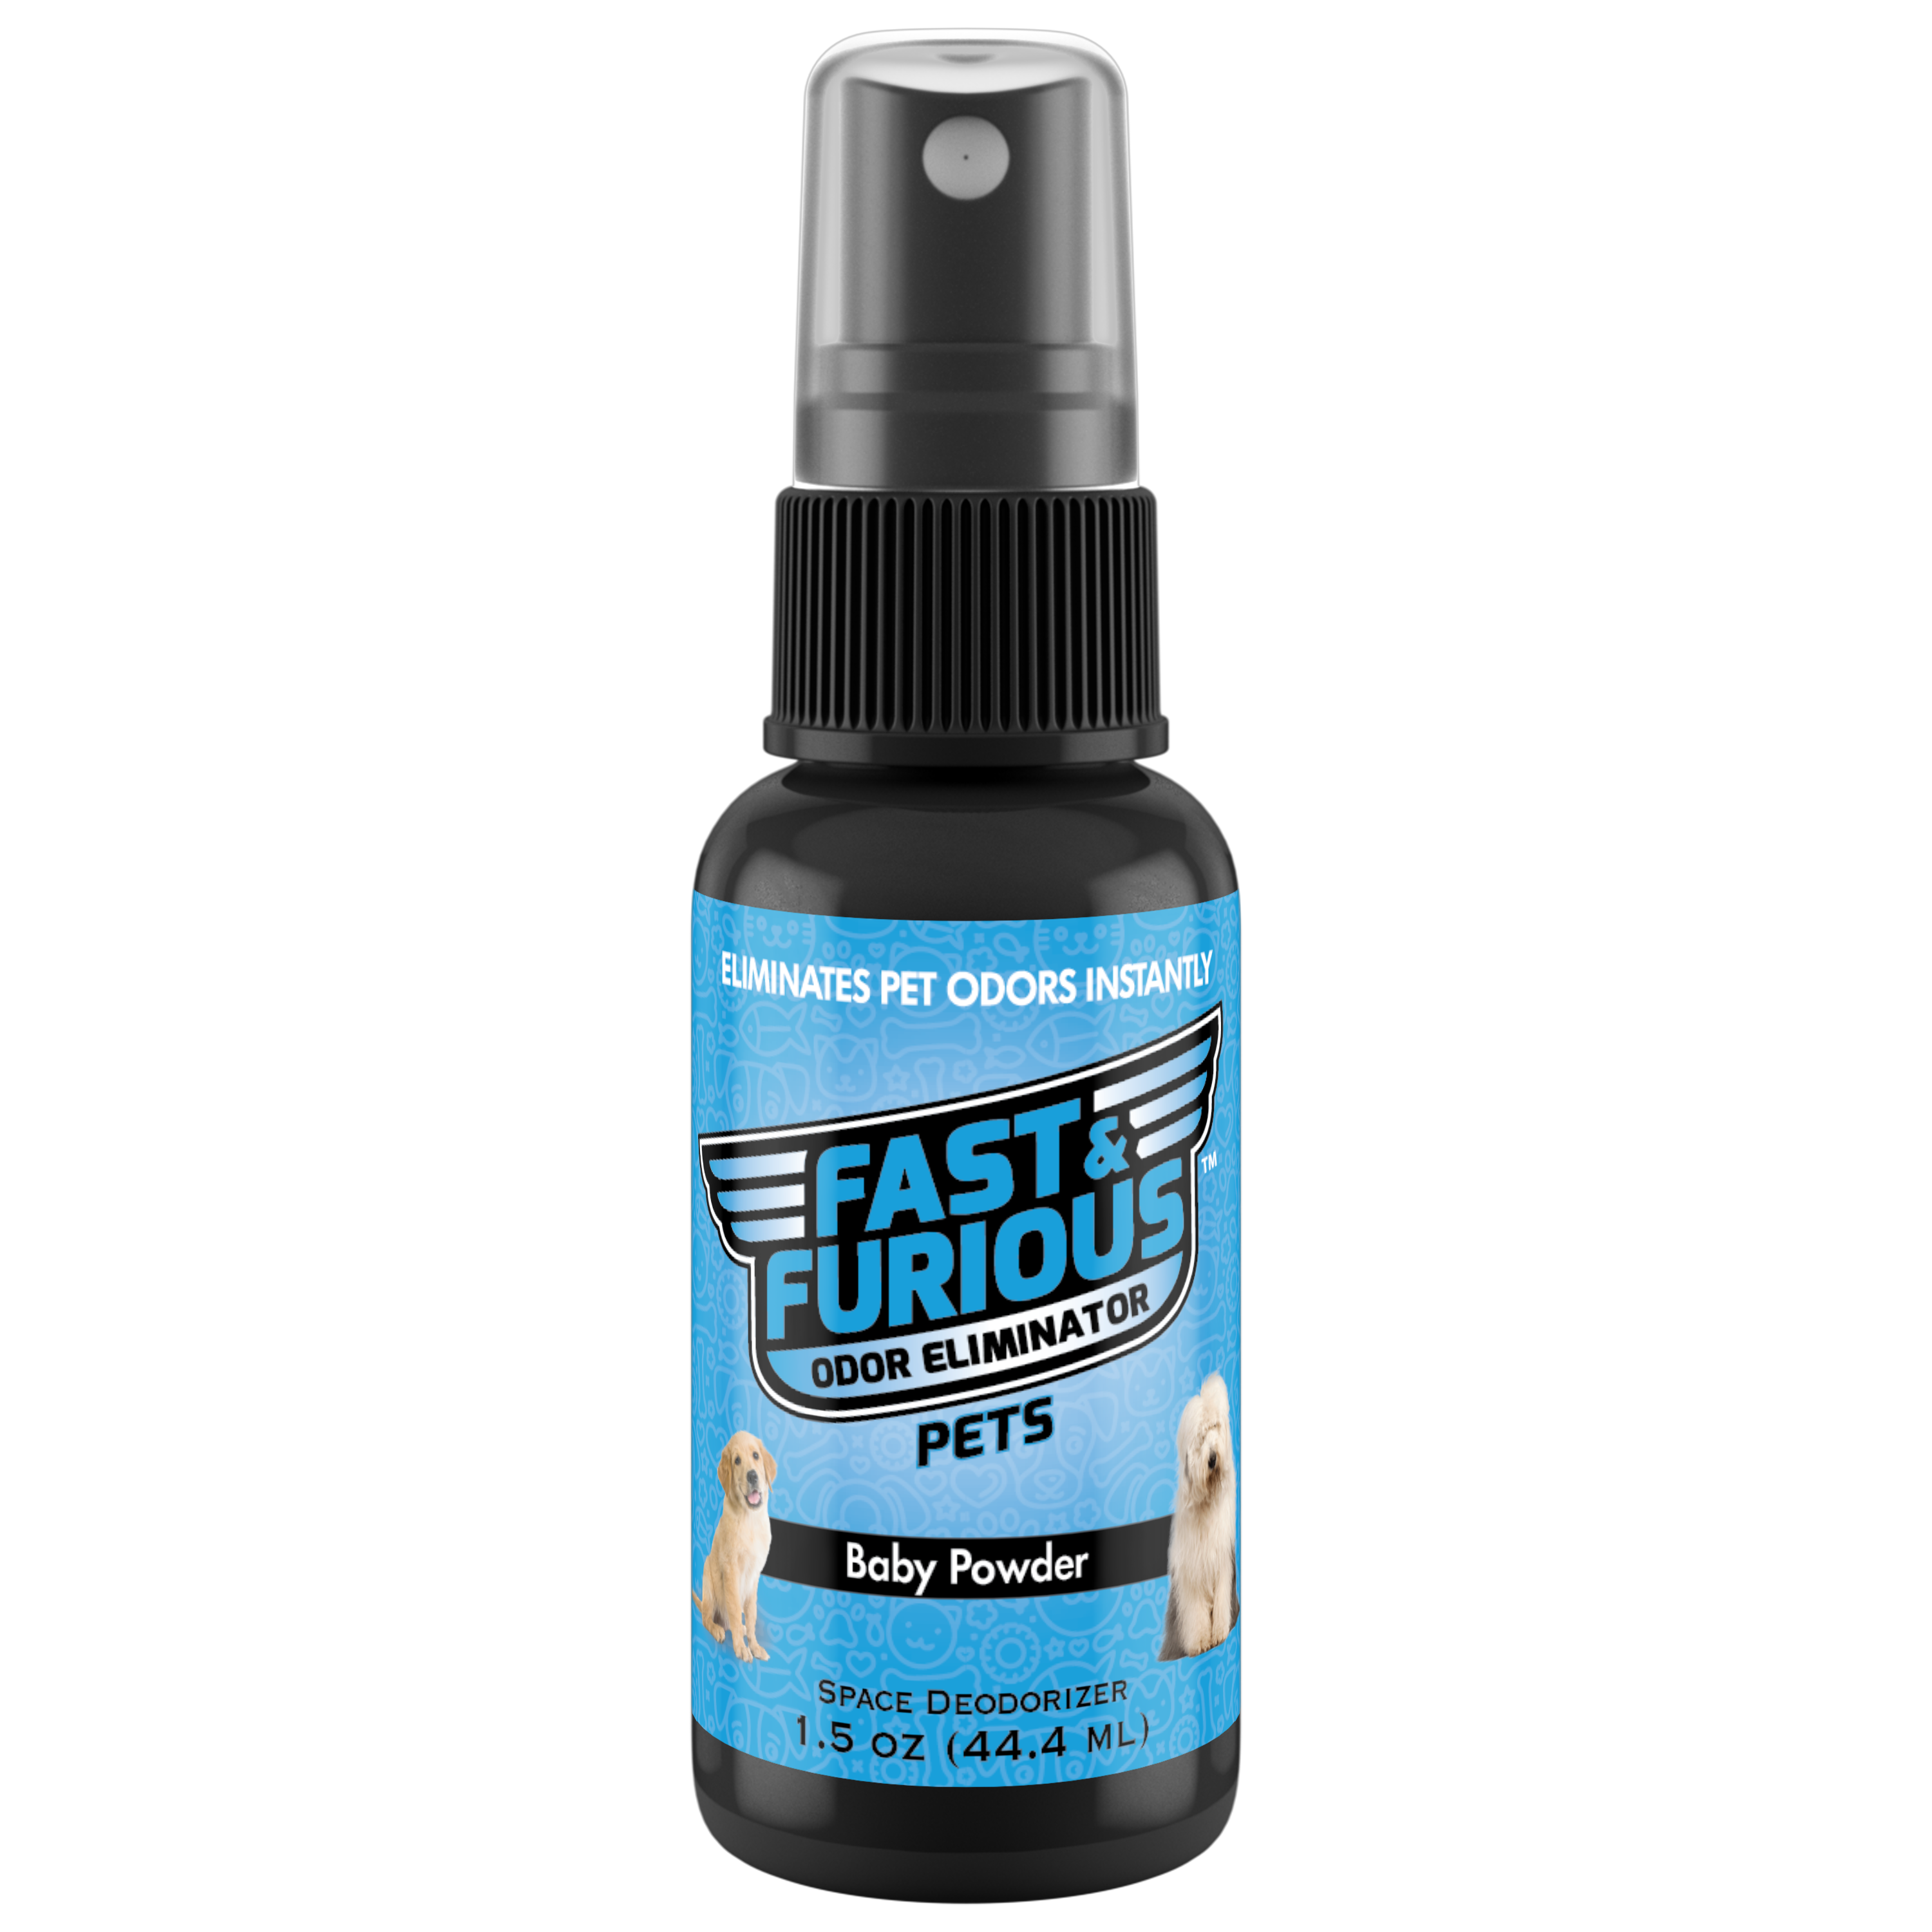 Fast and Furious Pets Odor Eliminator - Baby Powder Scent